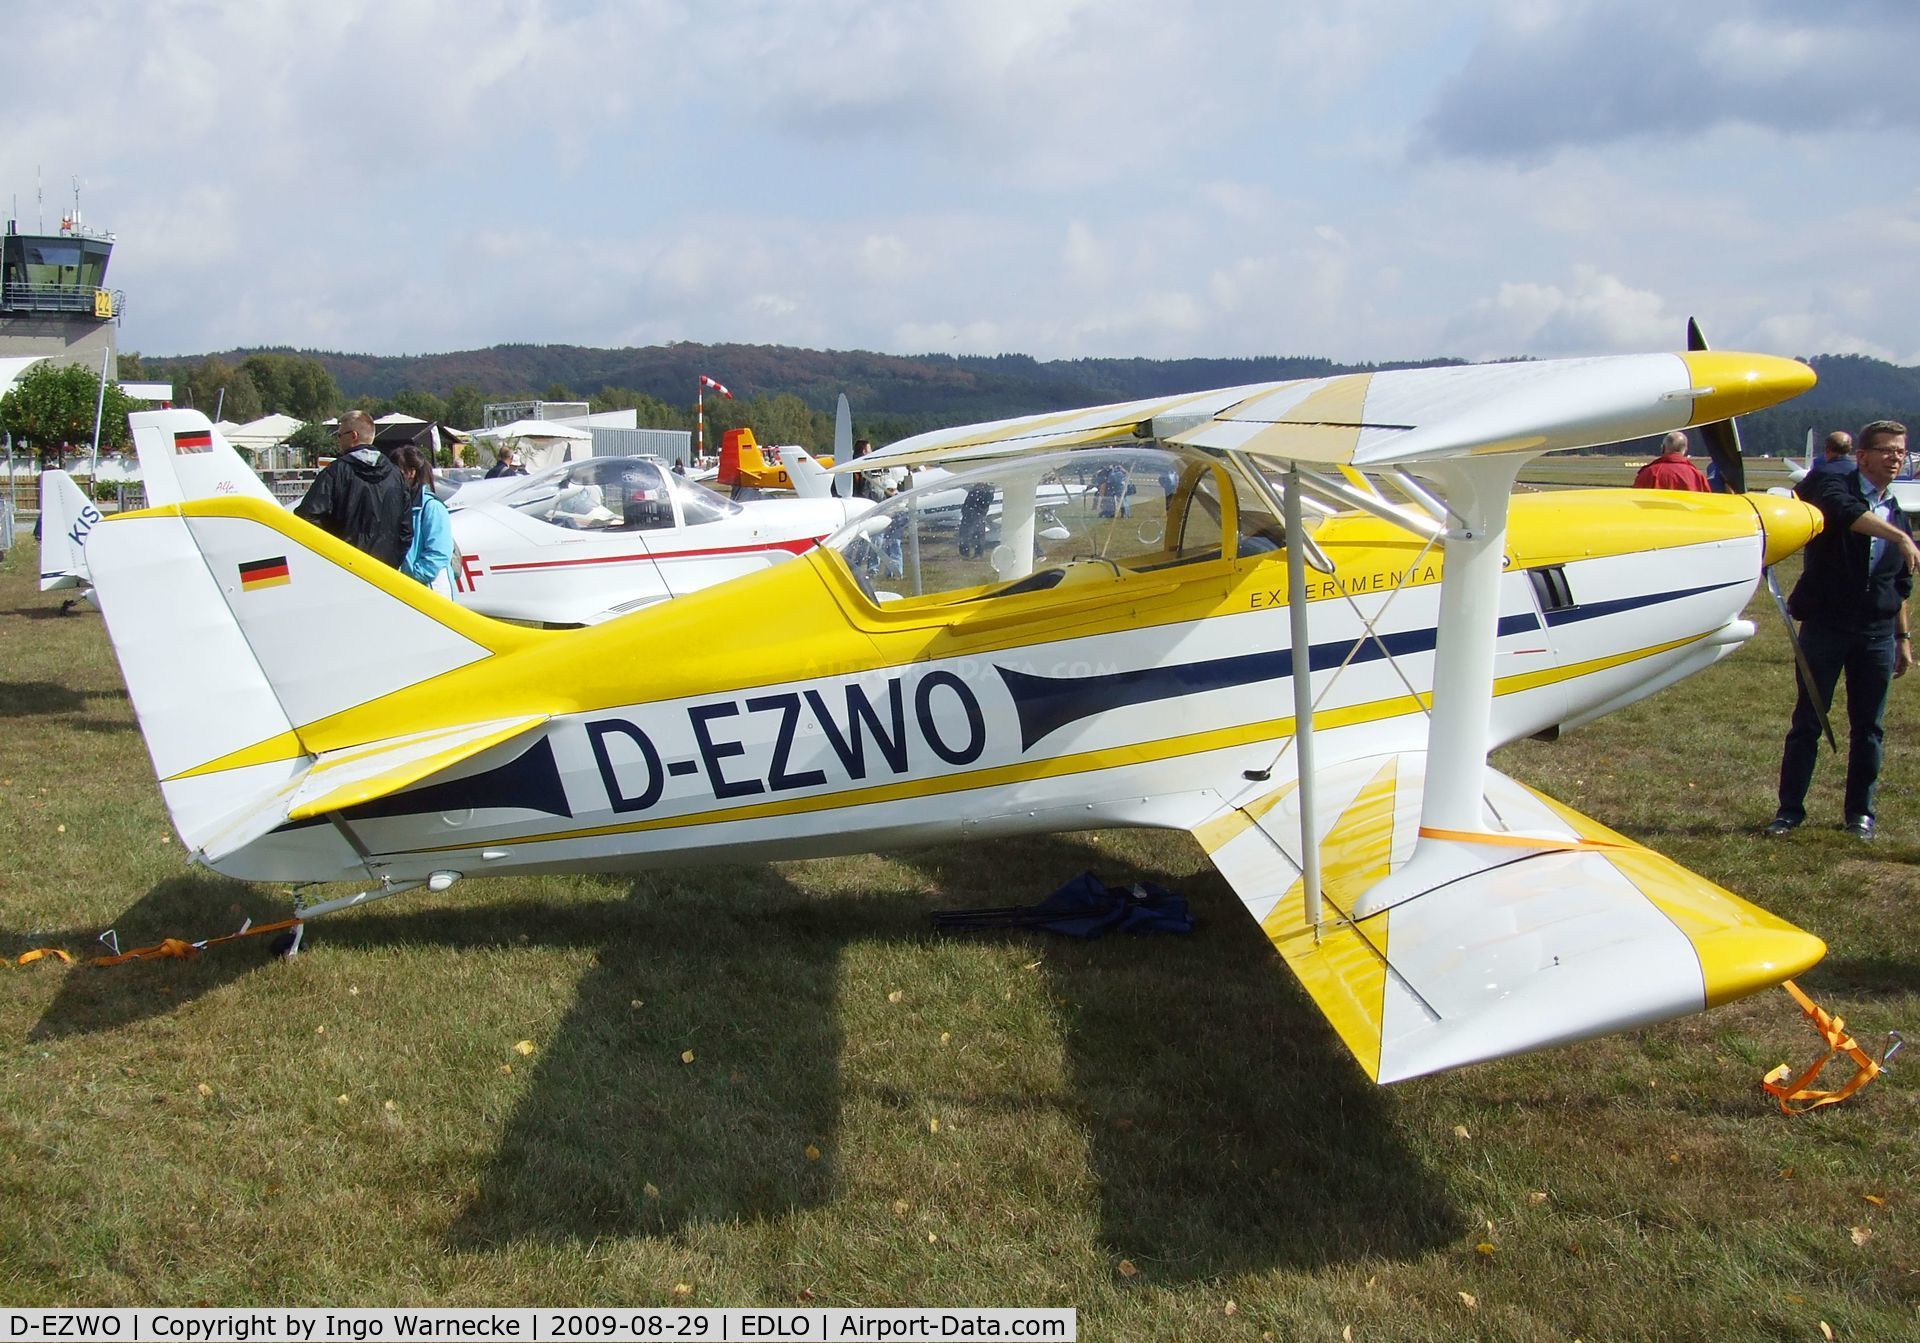 D-EZWO, B & F Funk FK-12 Comet C/N 012-037, B & F Funk (Siek) FK-12 Comet (with Wankel engine) at the 2009 OUV-Meeting at Oerlinghausen airfield